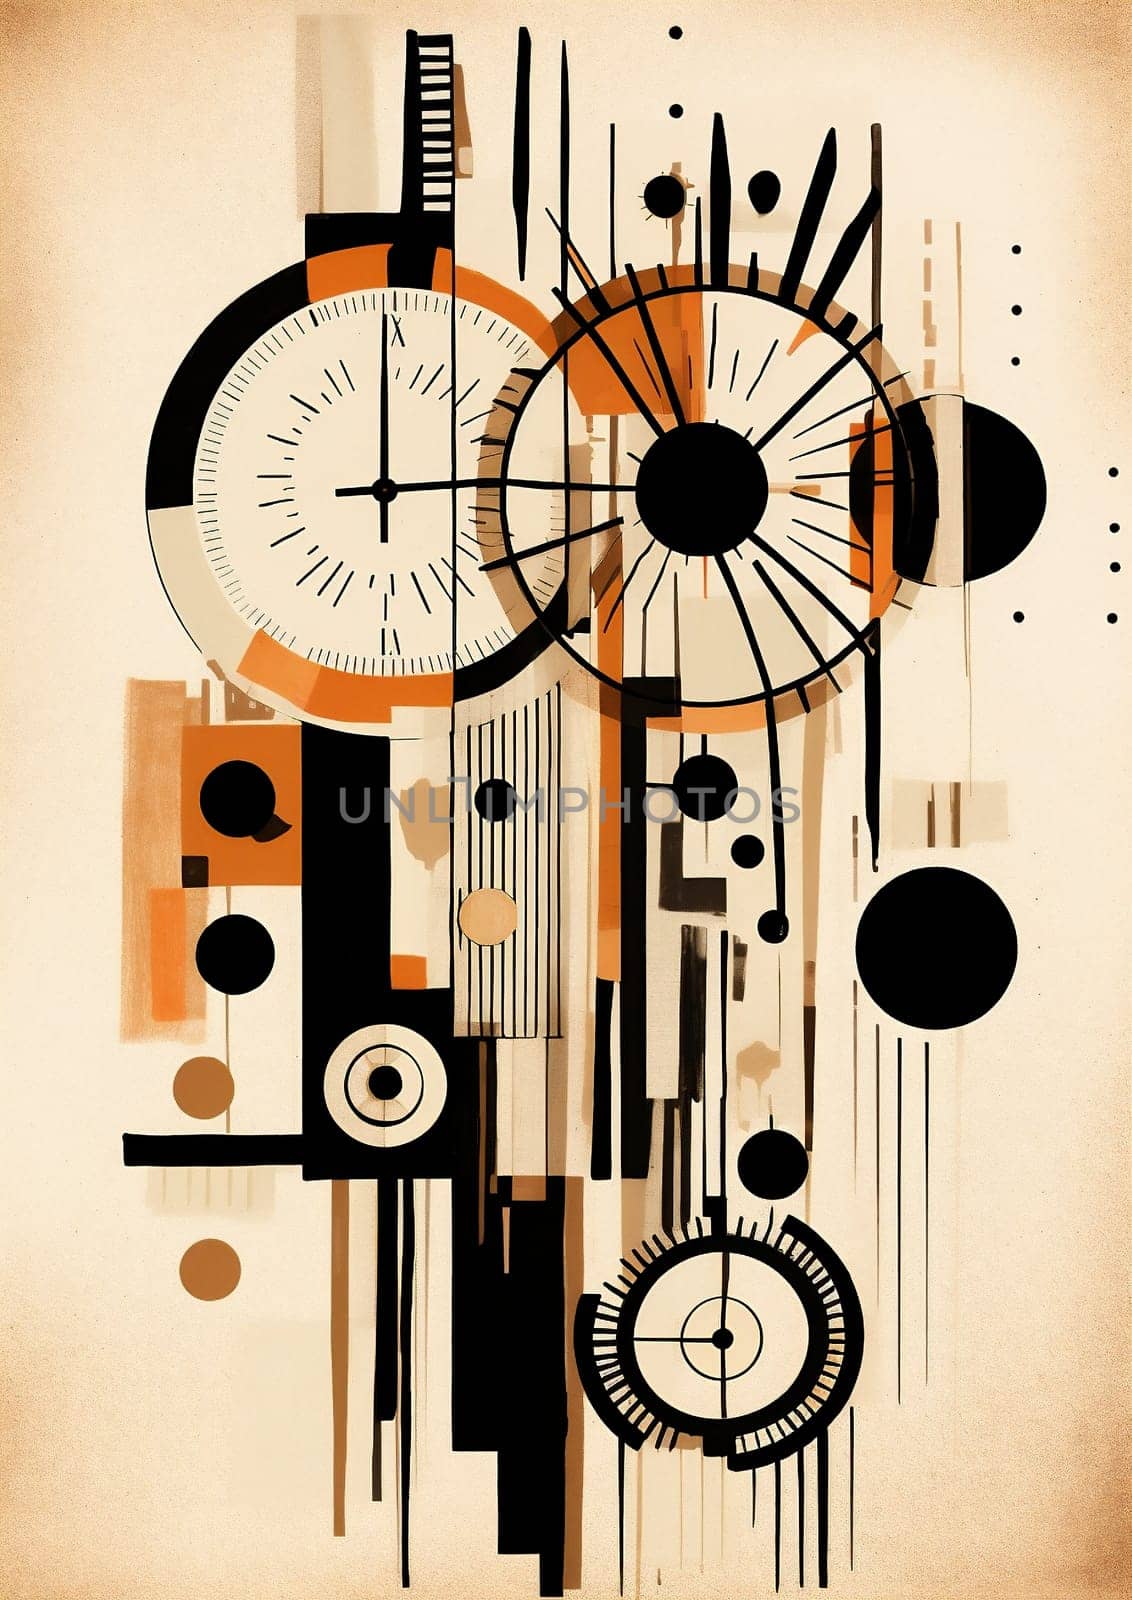 Time hour circle antique clock pattern old detail design grunge illustration mechanism texture closeup abstract watch vintage art retro minute background